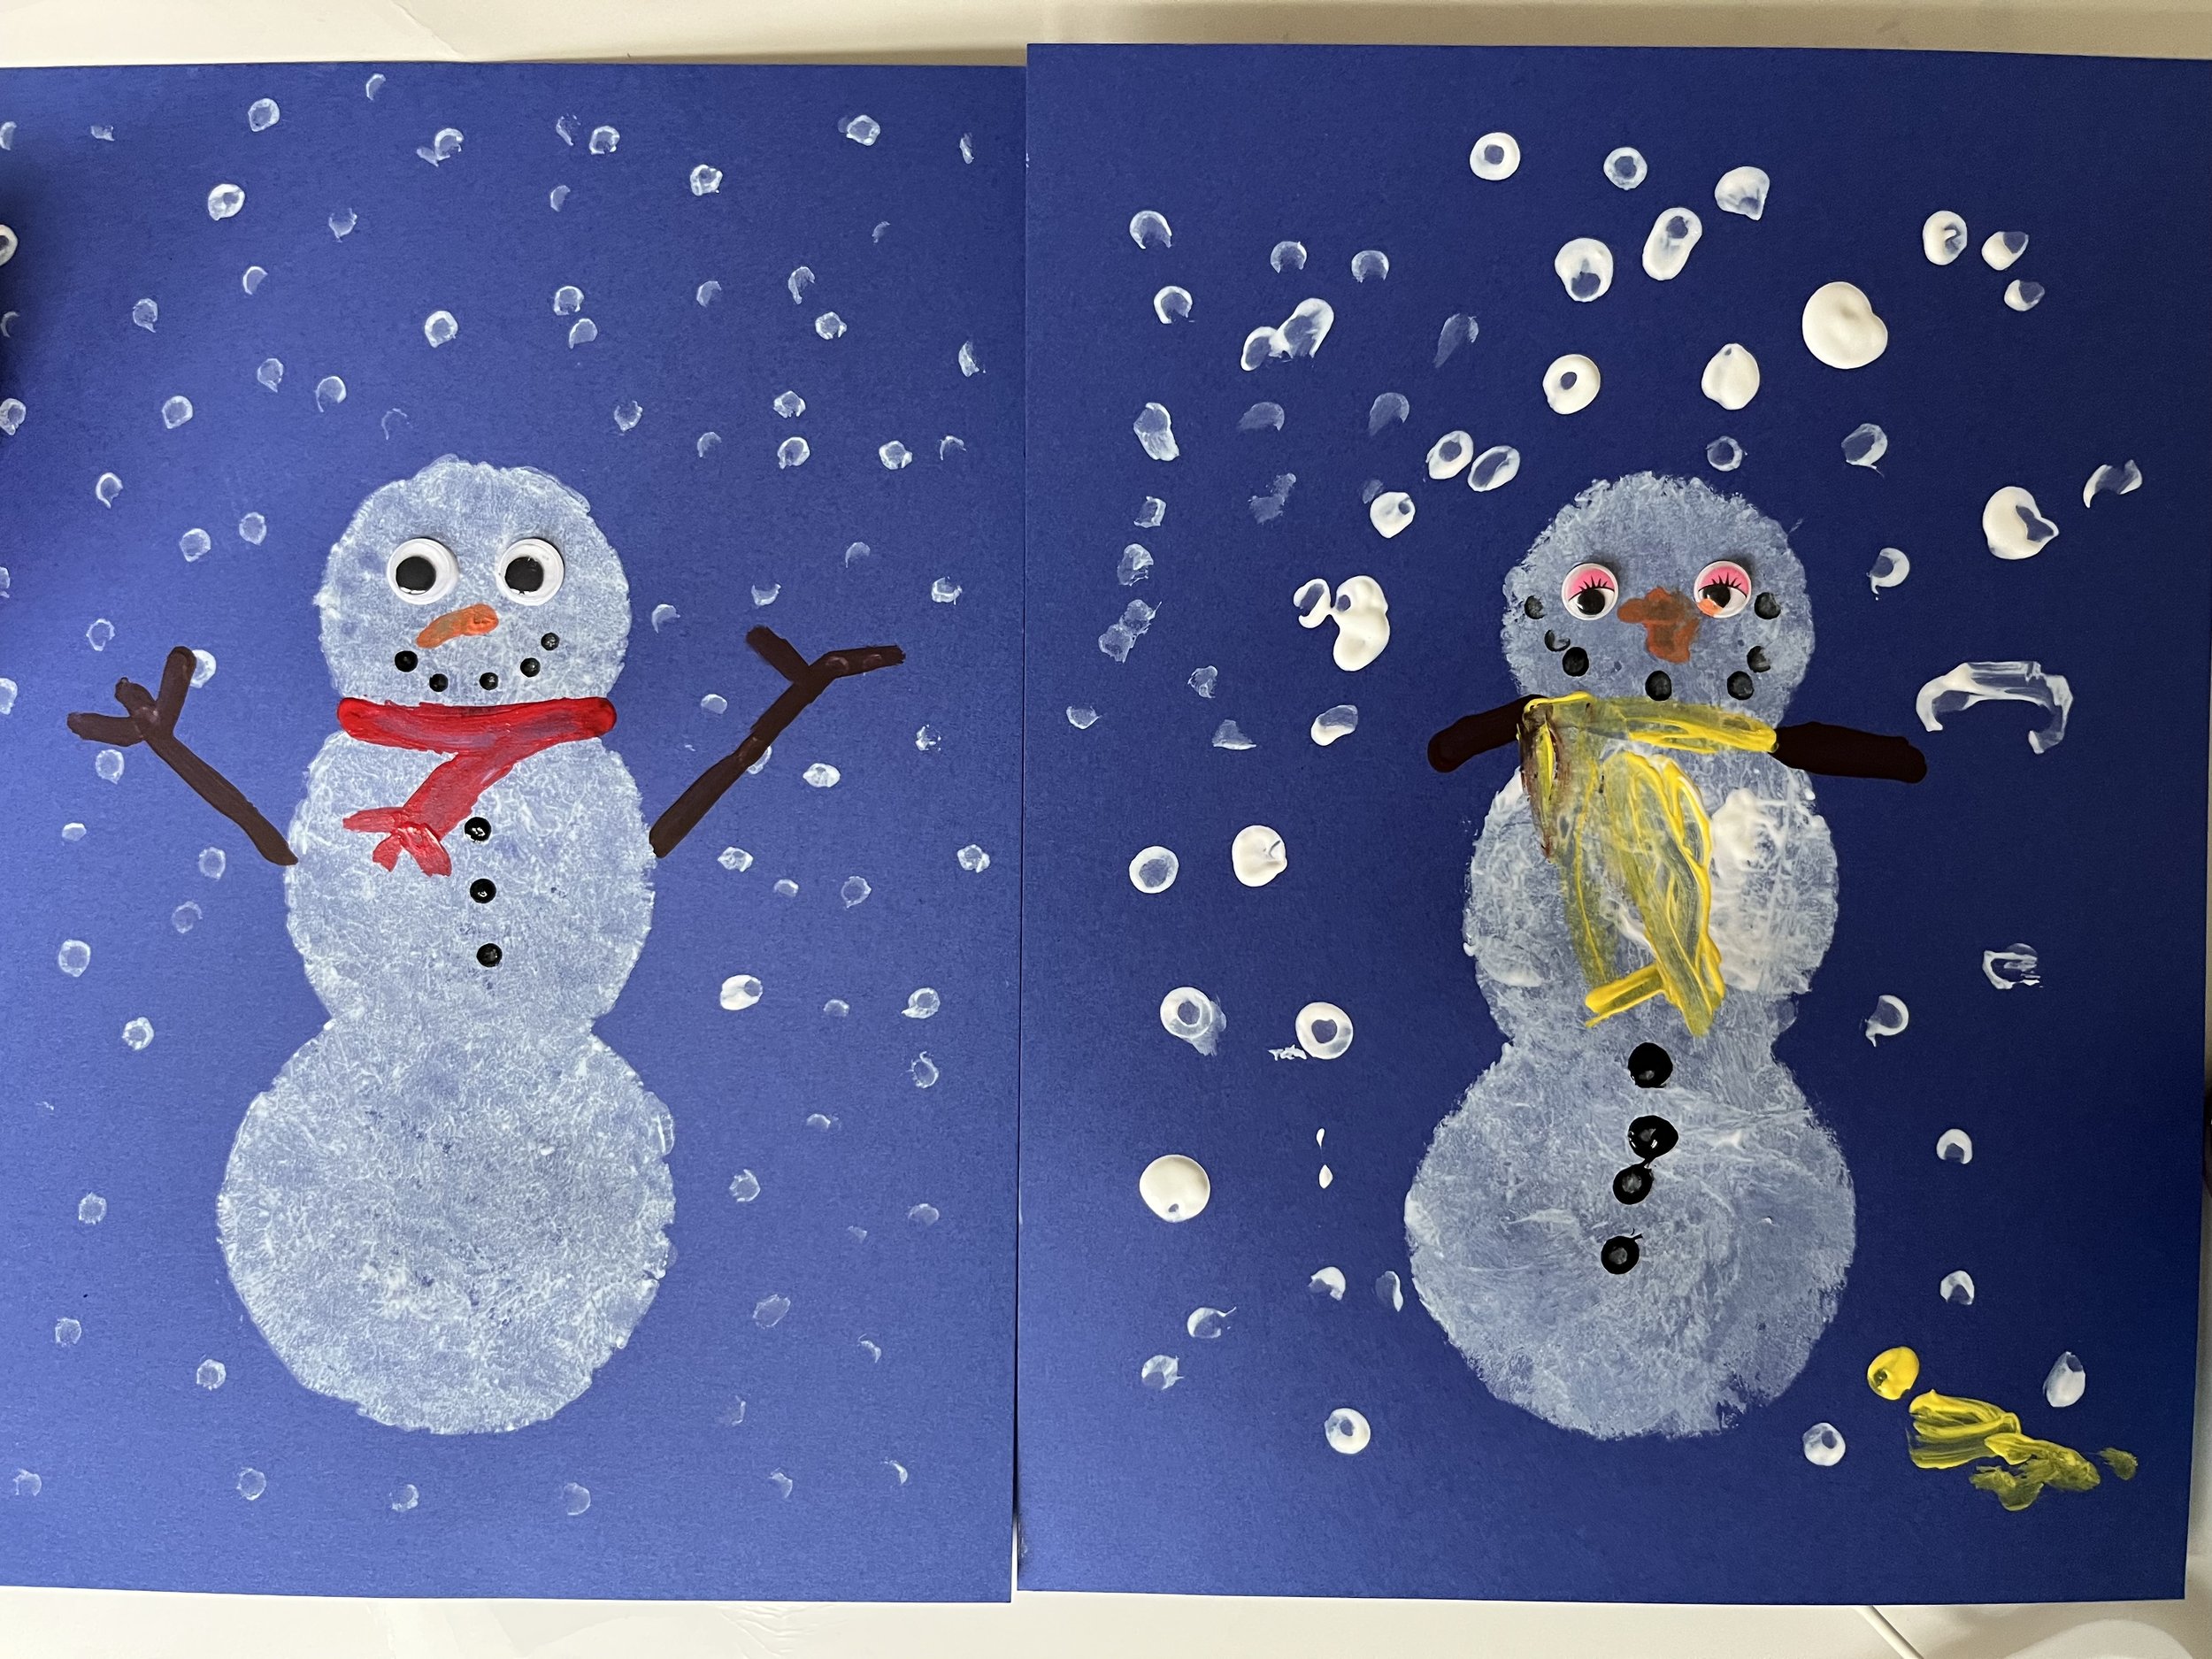 Cotton Ball Stamped Snowman Craft - Our Kid Things